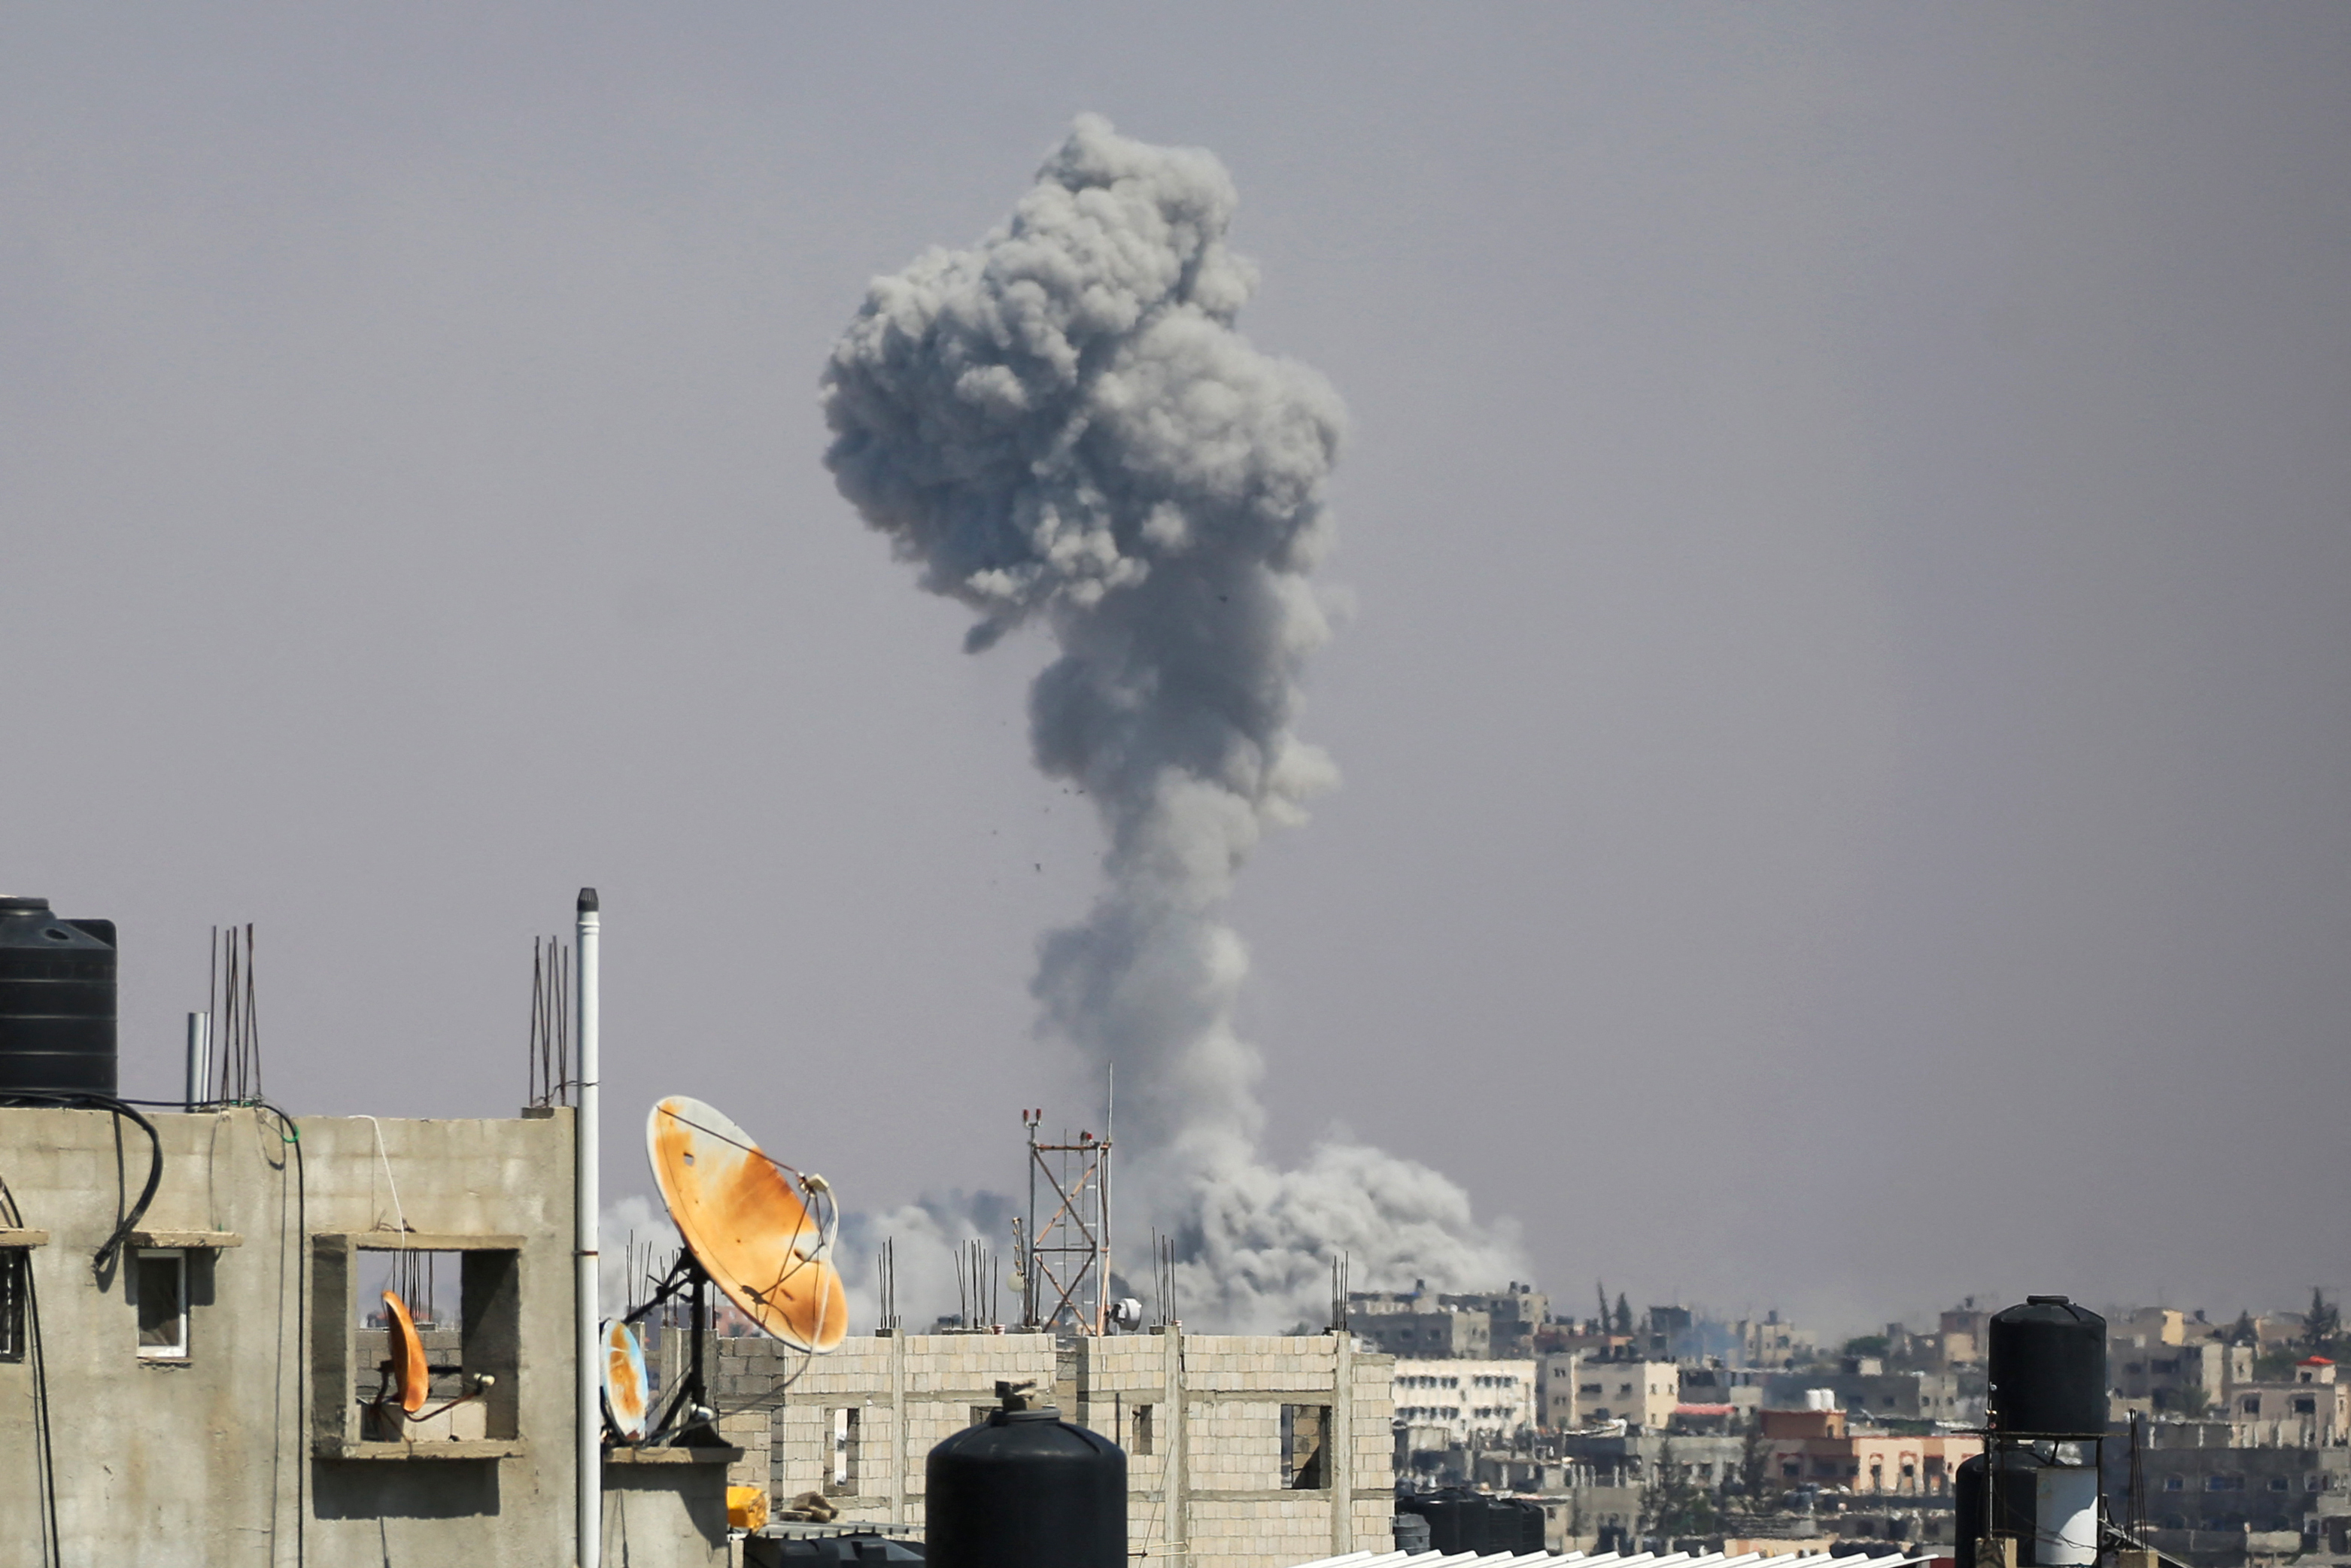 middle east conflict live updates: israel says it has reopened key aid crossing; u.s. paused bomb shipments to israel